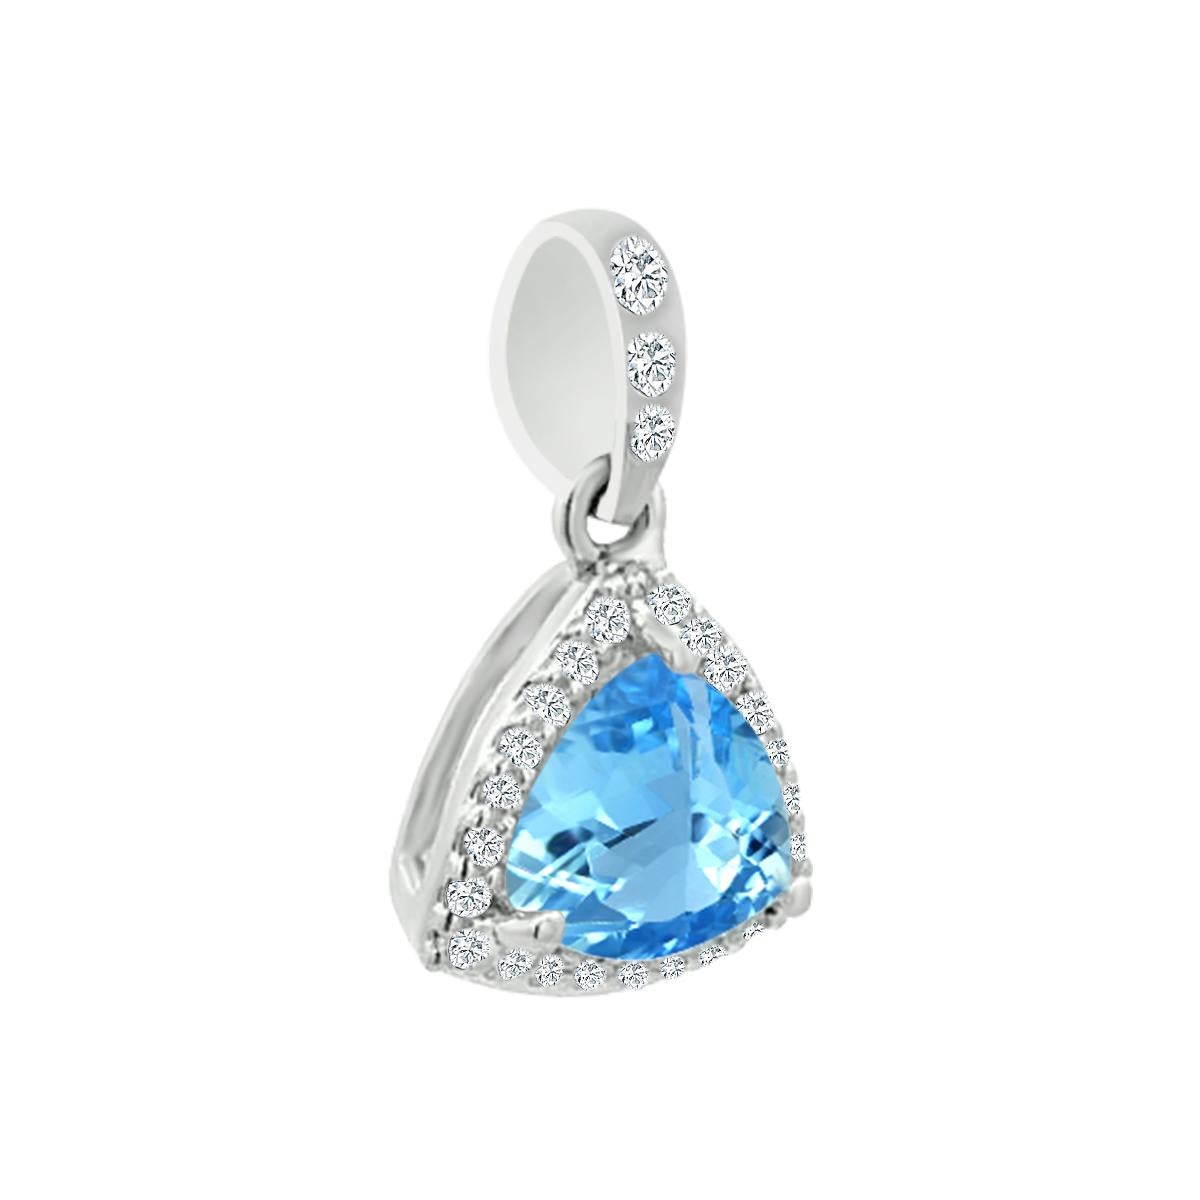 A Striking Trillion Cut 6mm Aquamarine Is The Centre Of Attraction In This Pendant With Its Magnificent Blue Hues Reflecting From The Trillion Cut Facets. This Pendant Is Crafted In 14k White Gold  And The Elegant Stone Is Absolutely Memorizing.